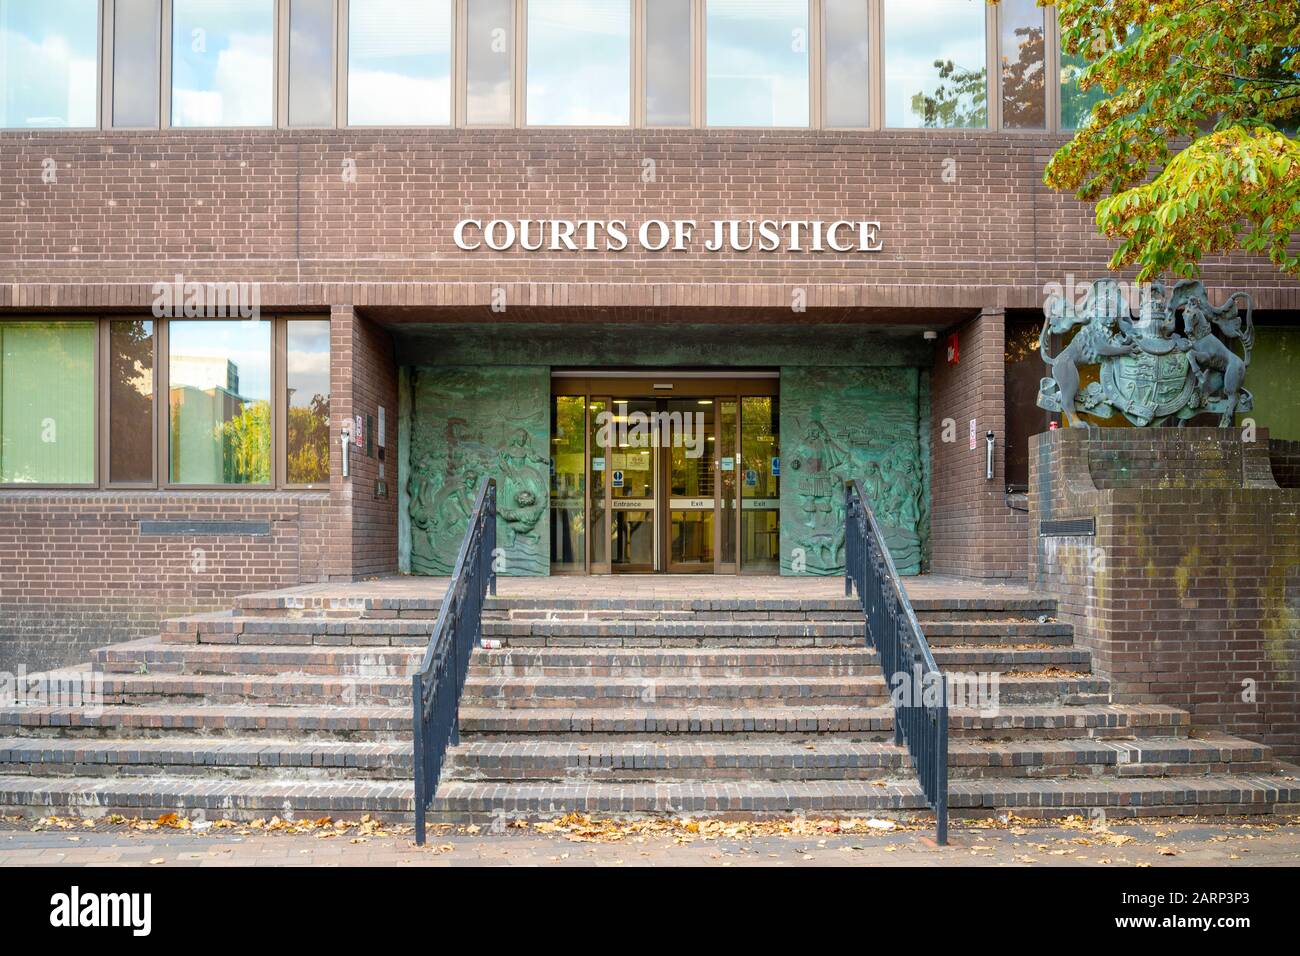 Portsmouth, Great Britain - November 1, 2019: Entrance to Courts of Justice Stock Photo